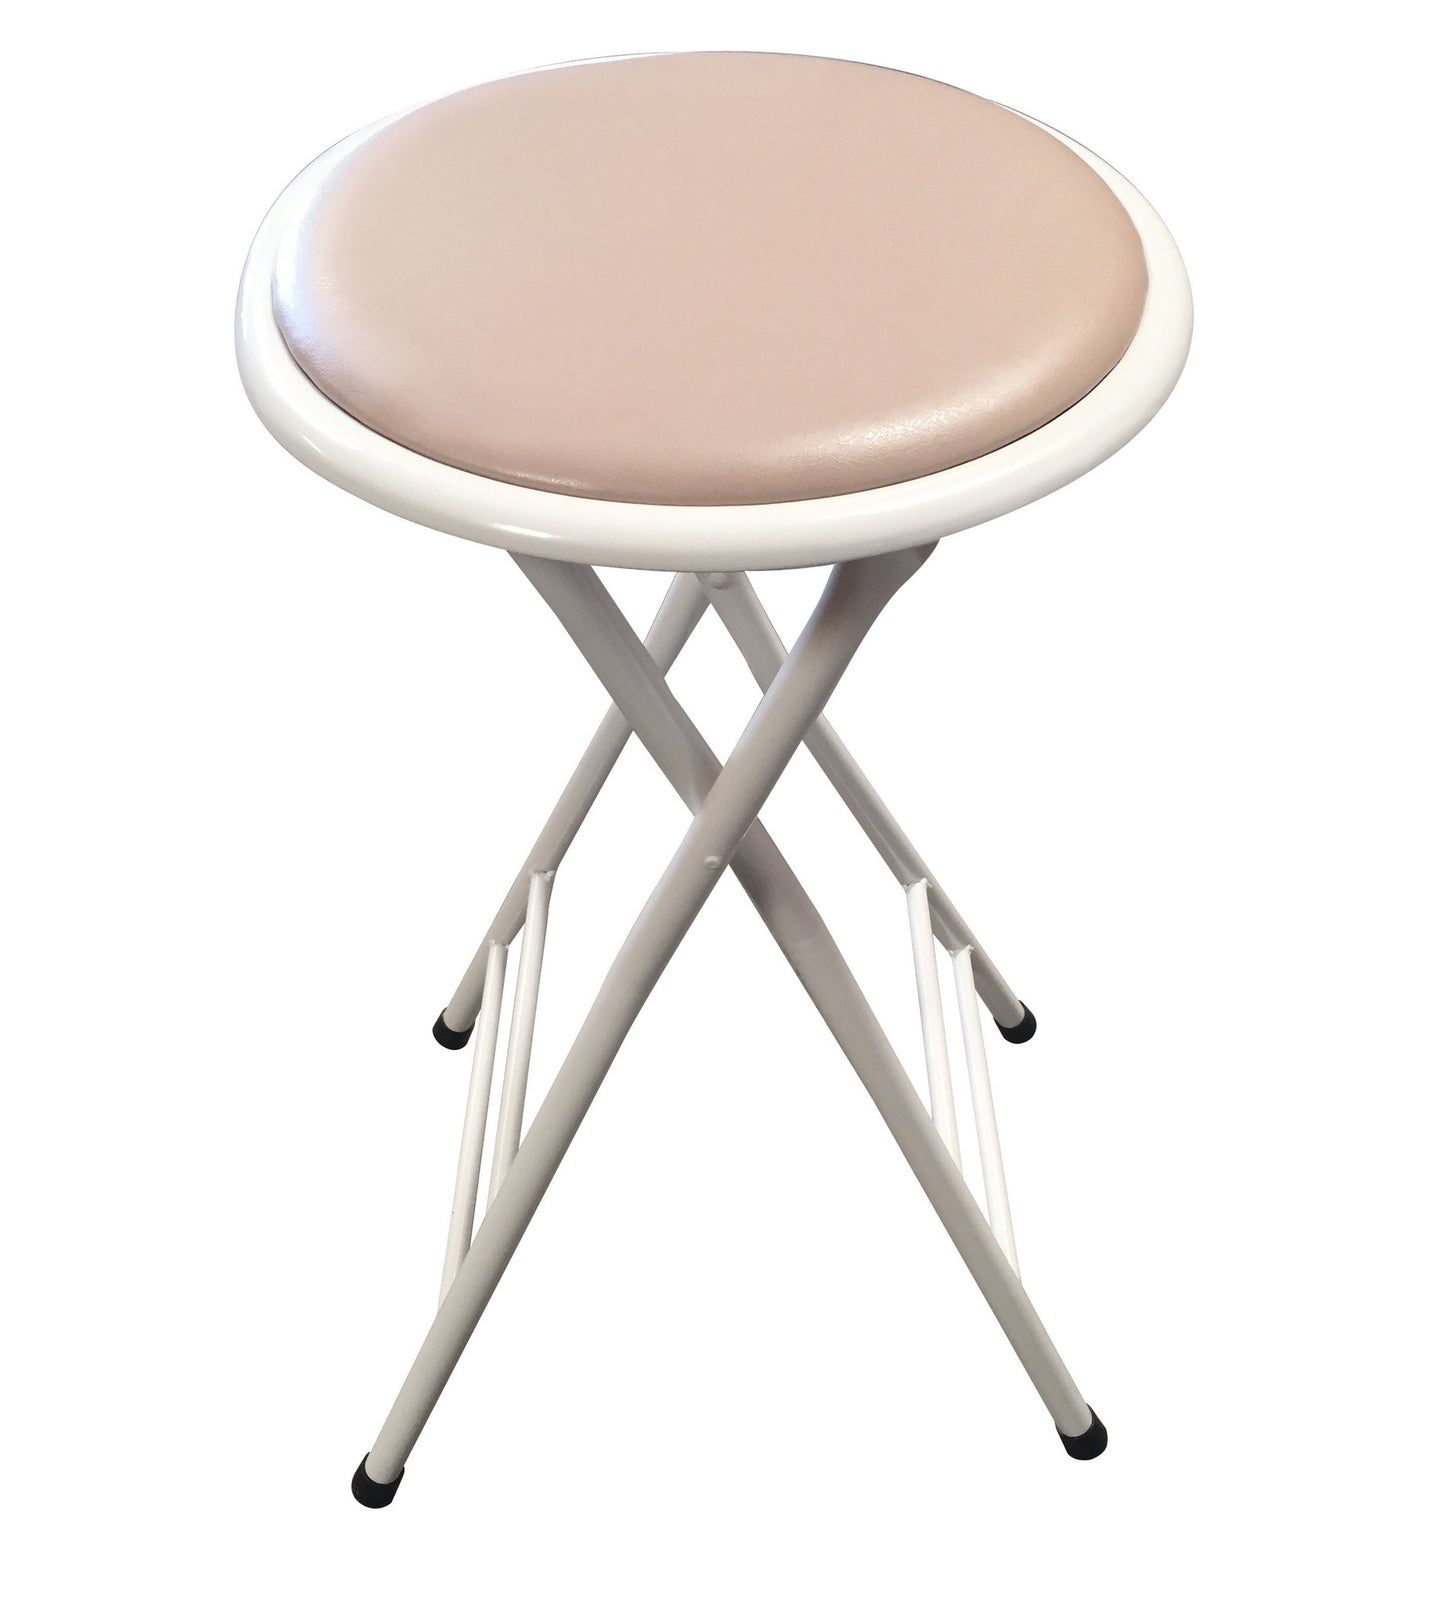 One Stool Only – No Seat Cover